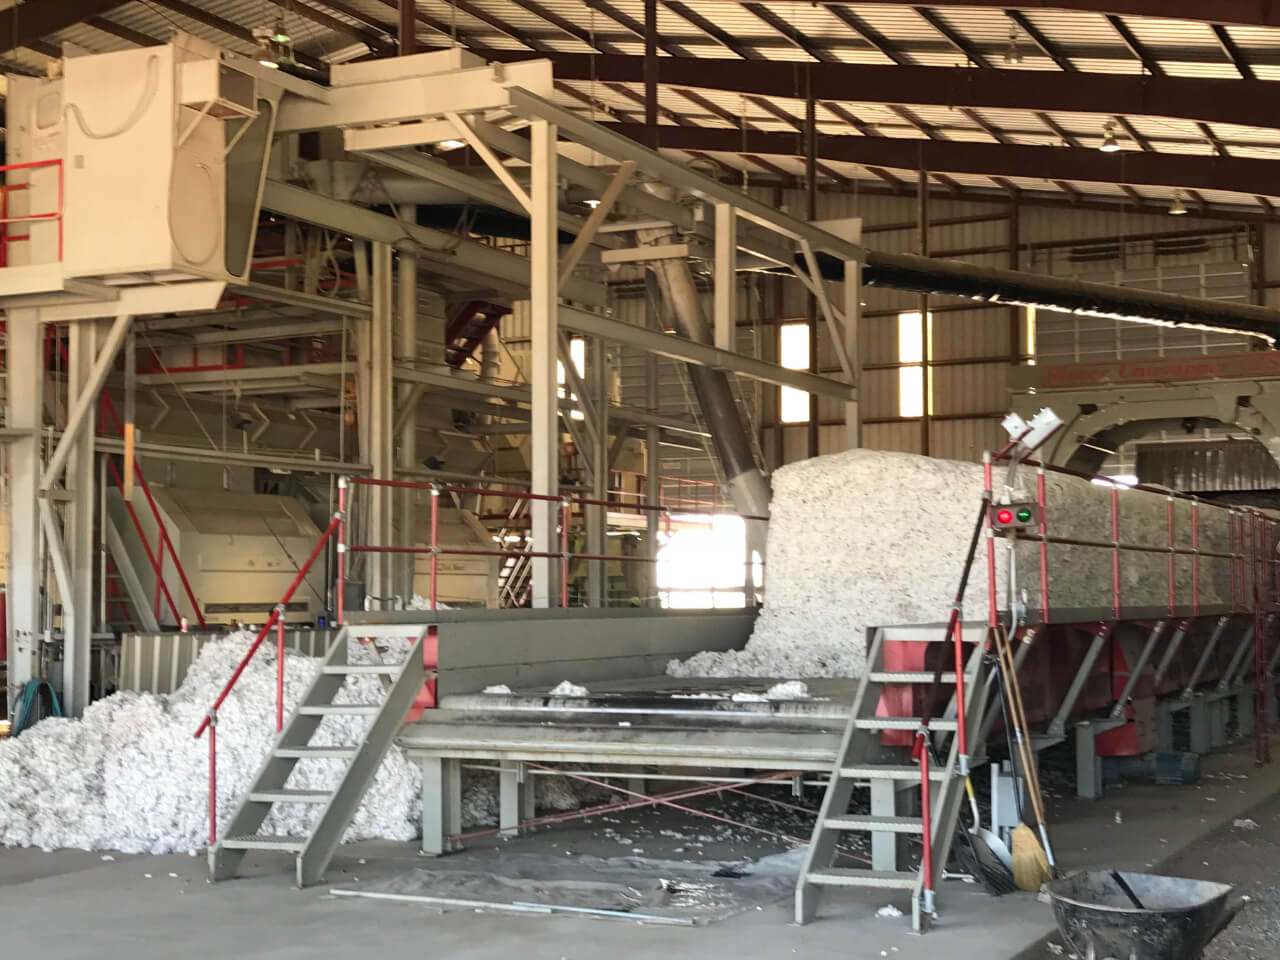 A picture of cotton being processed